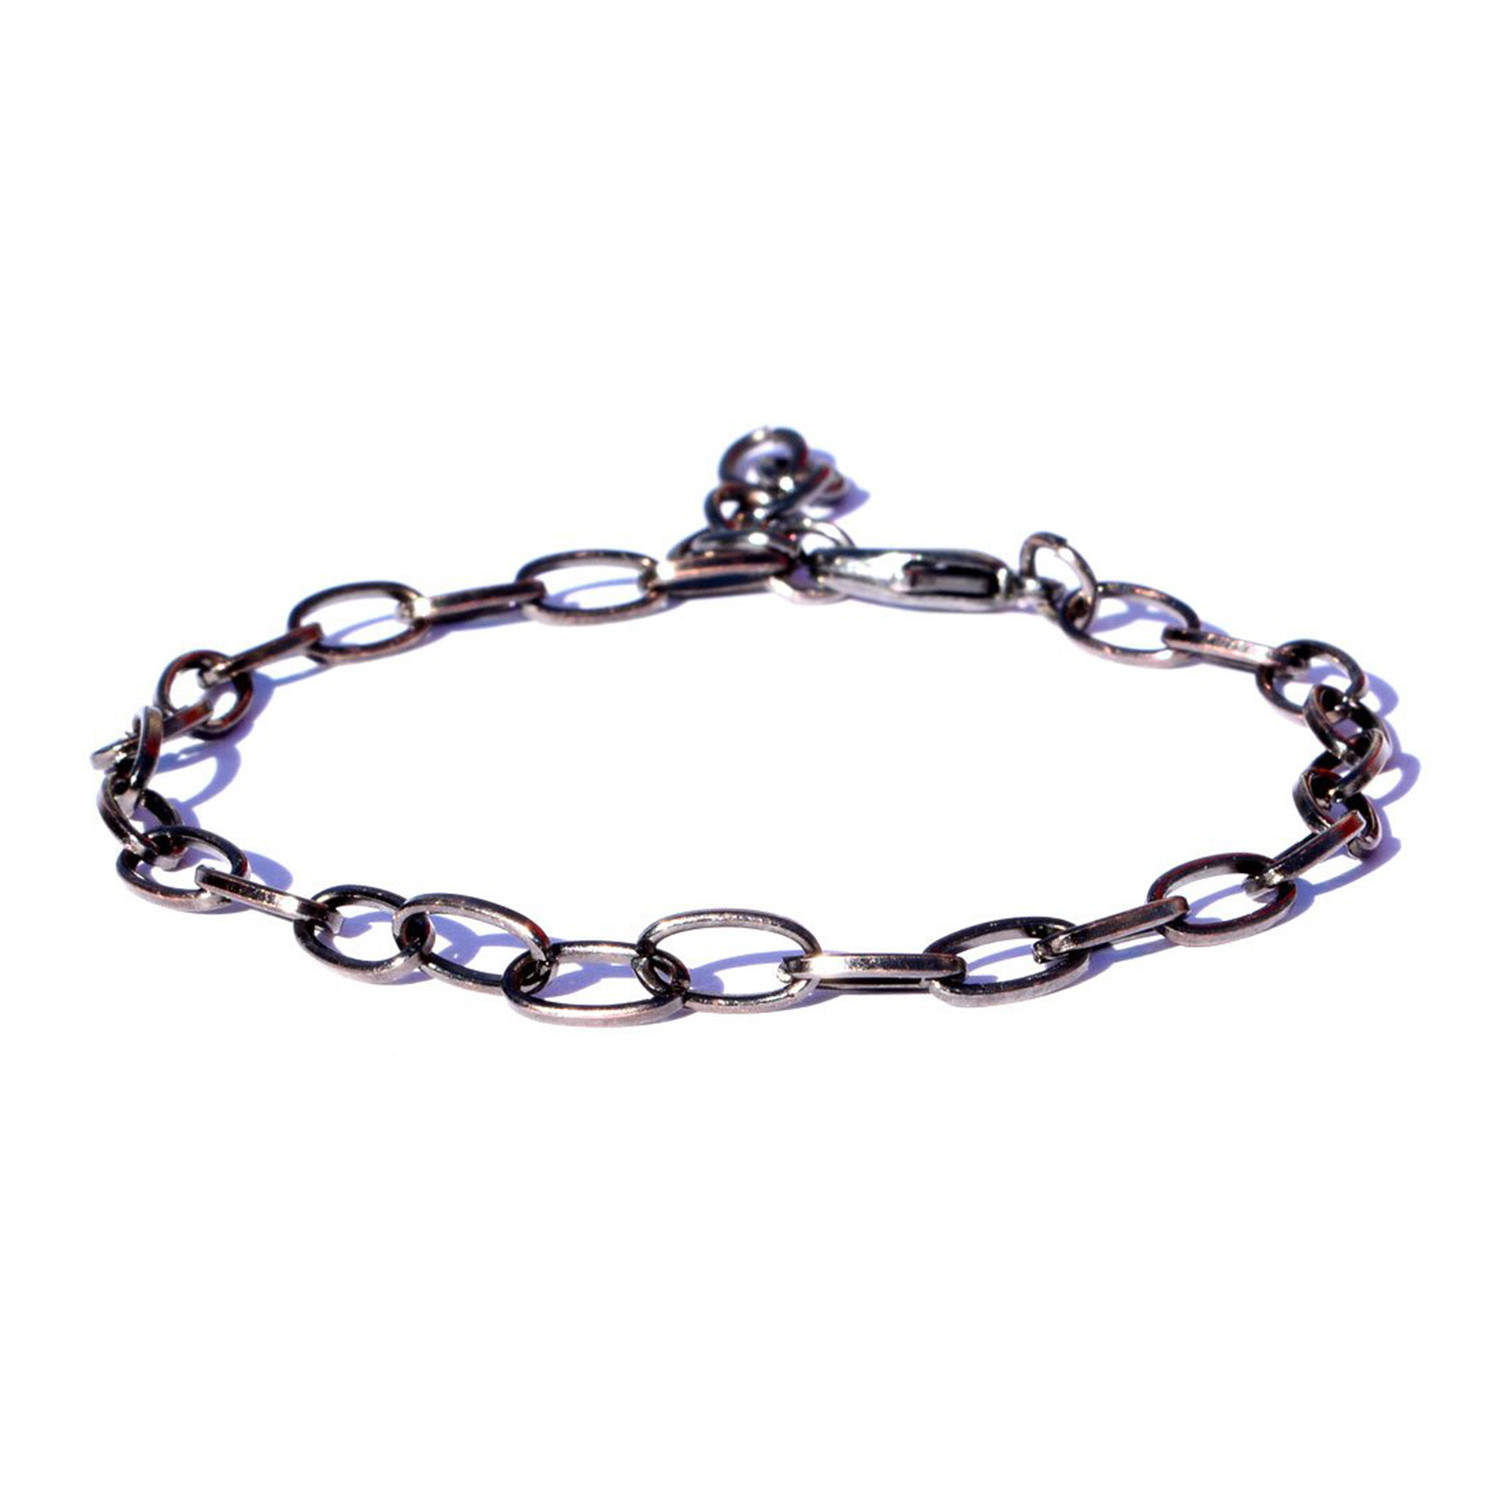 Metal Chain Bracelet // Silver - Who's Lookin' Design - Touch of Modern